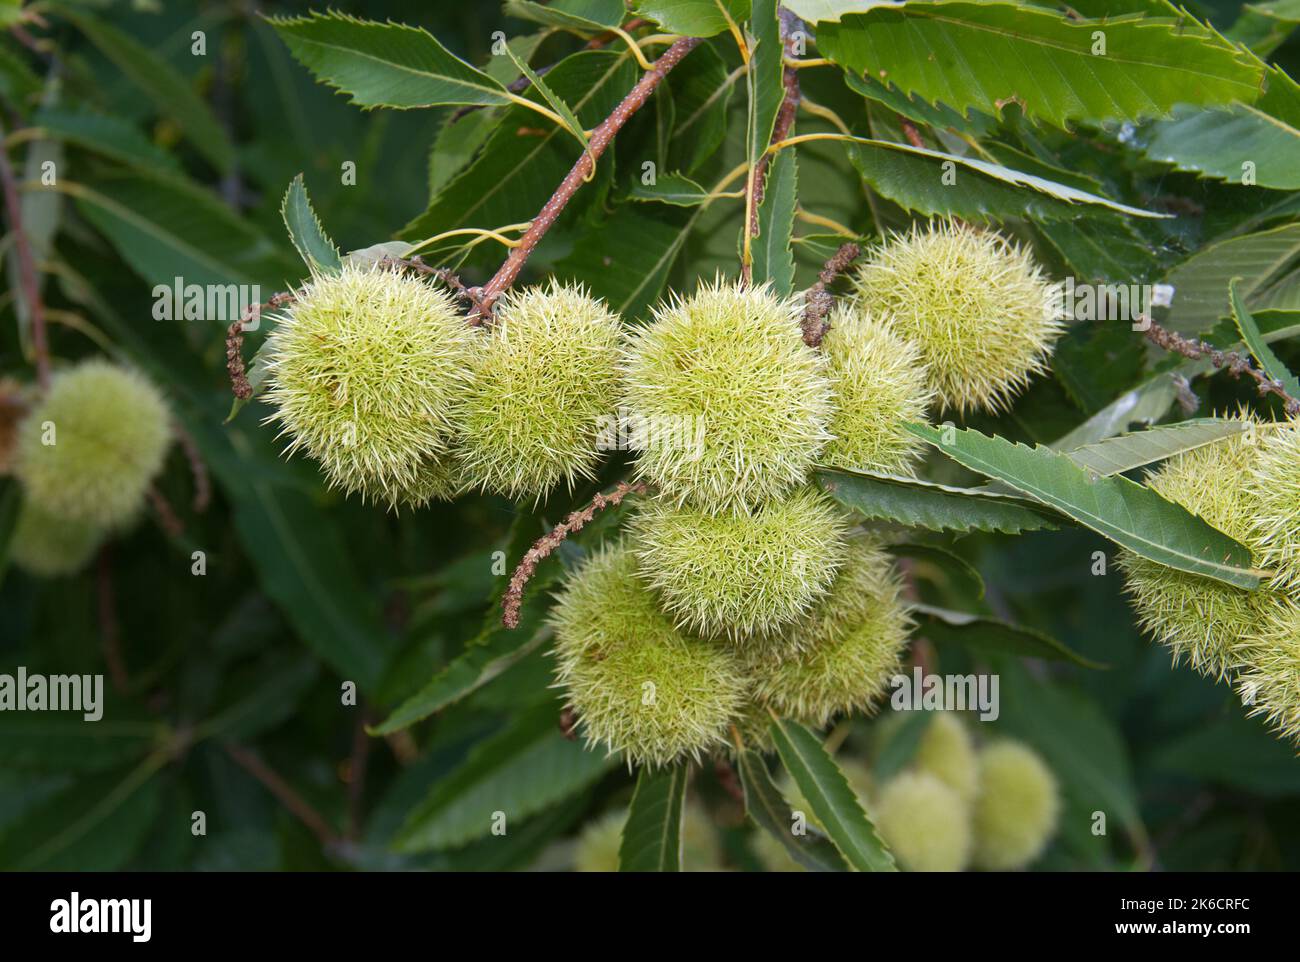 Cluster of spiky sheaths and leaves of Sweet chestnut Stock Photo